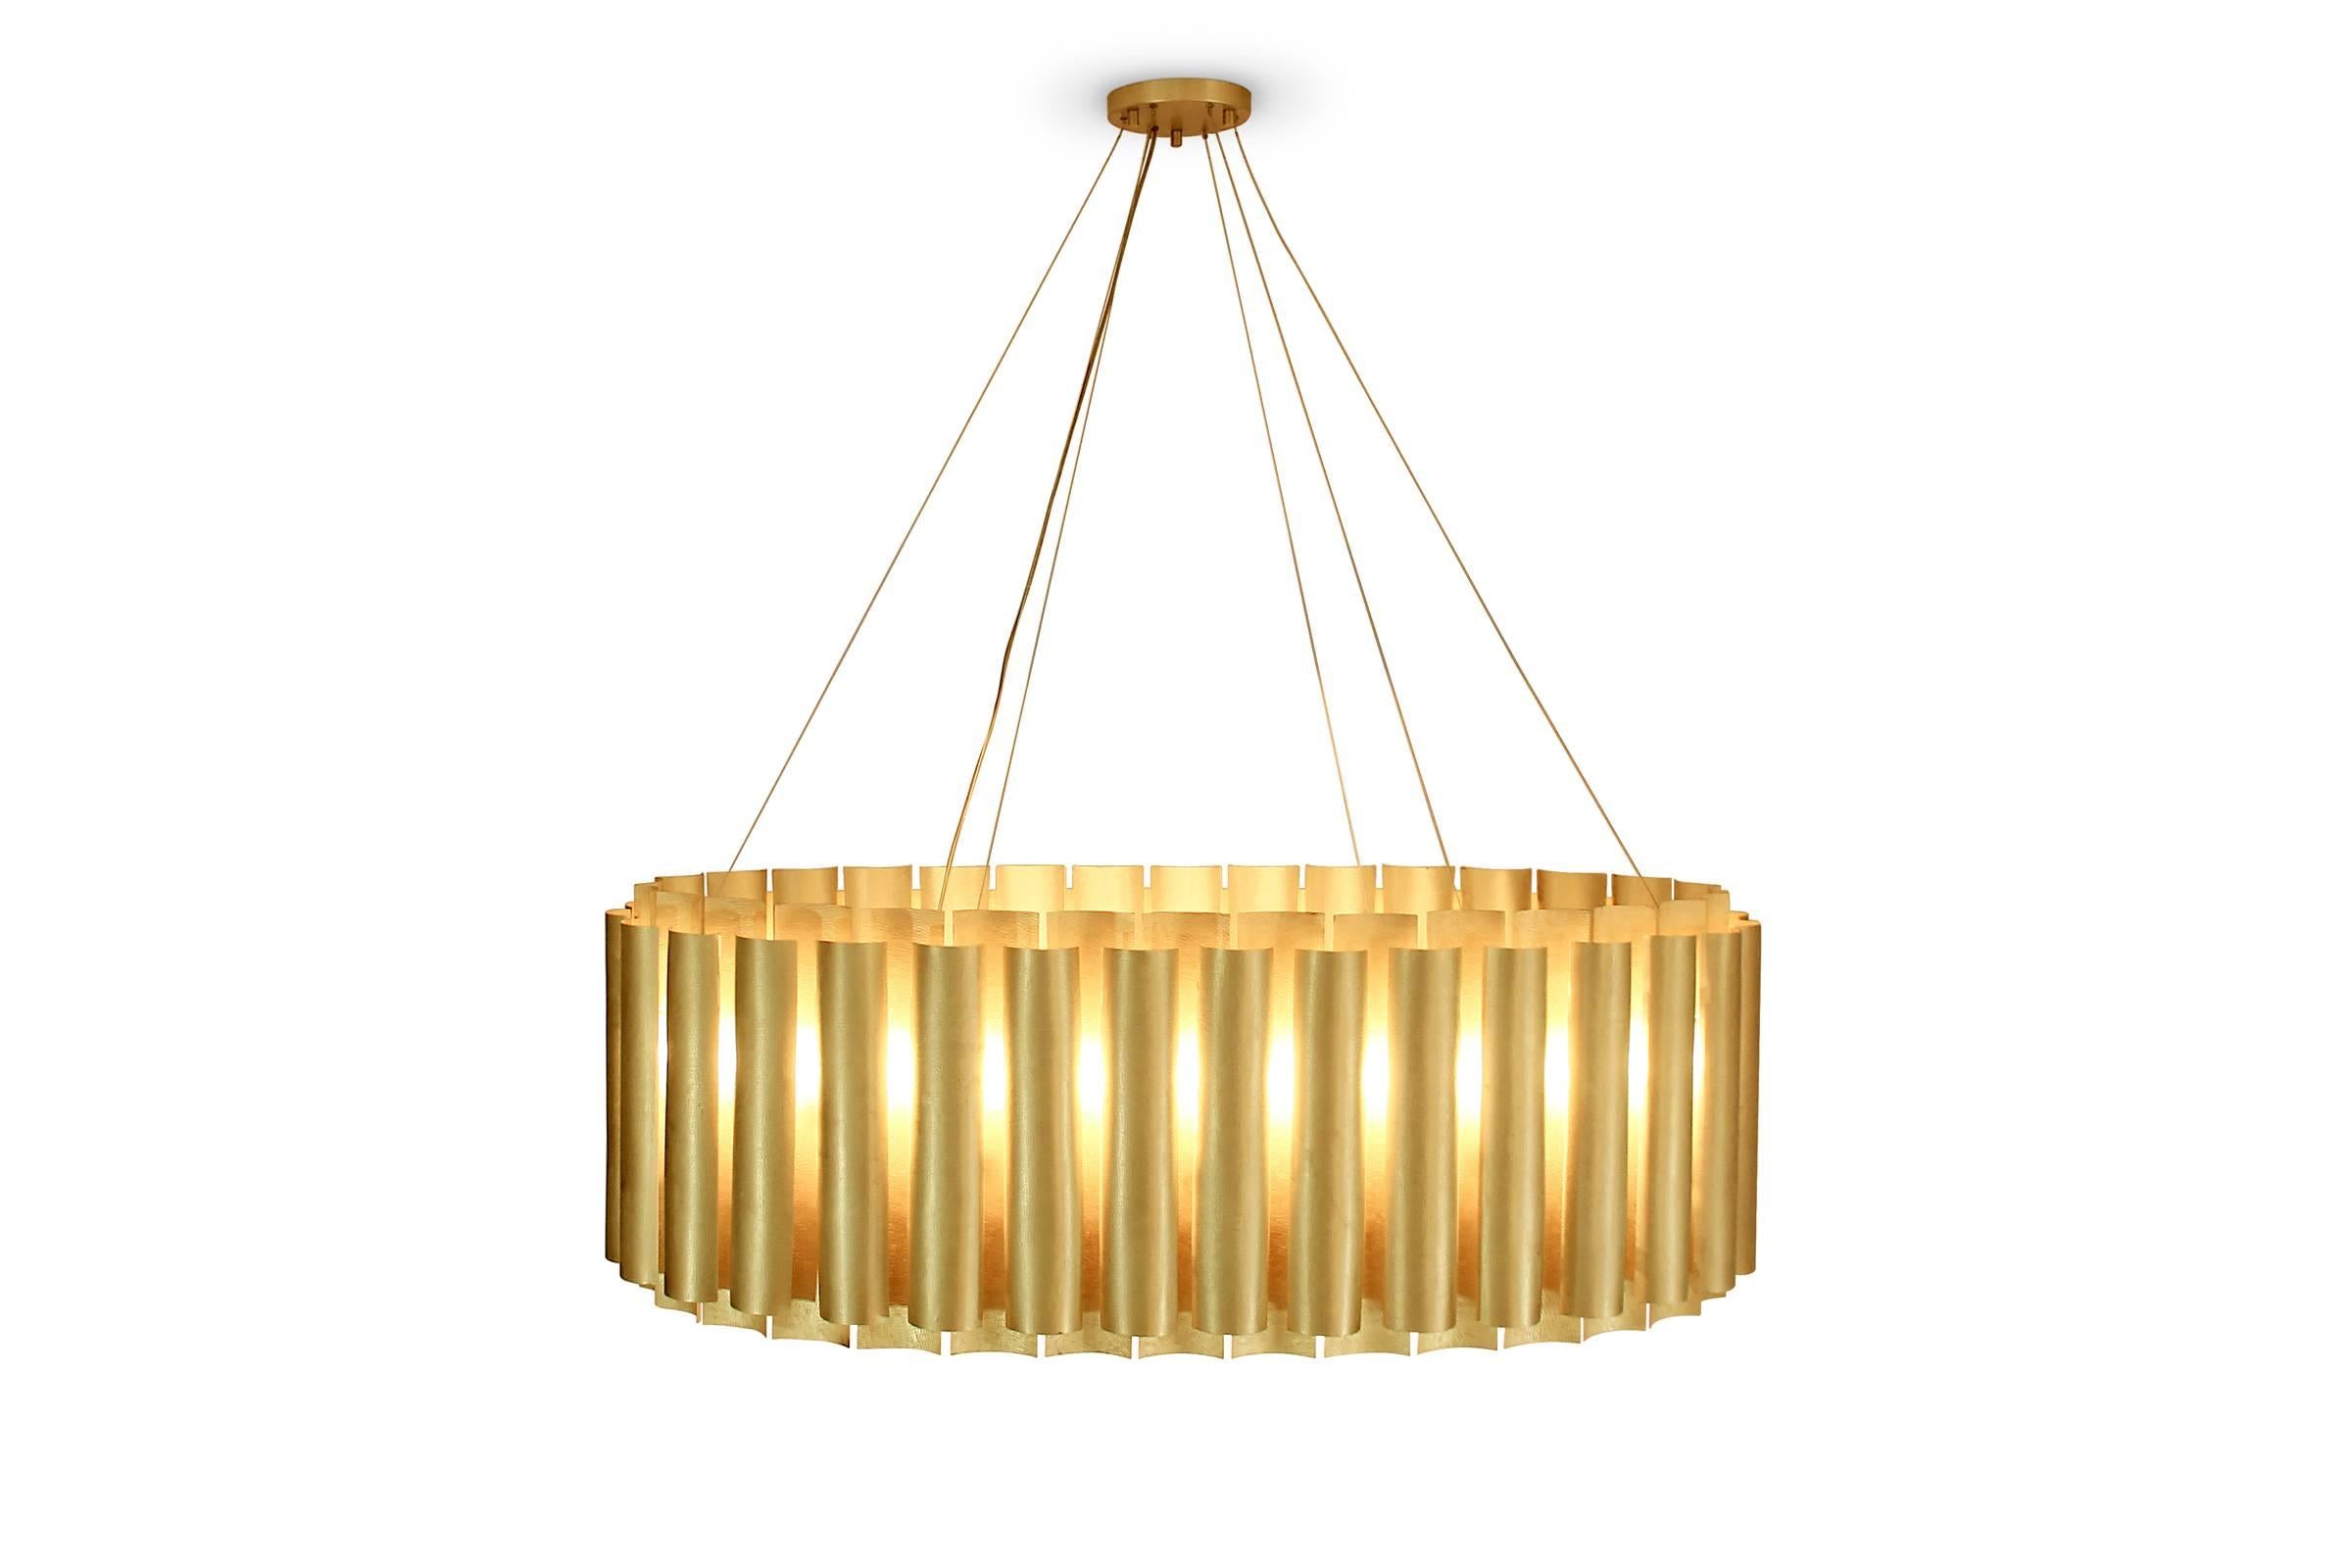 Suspension Aura in hammered brass
handcrafted piece, subtle and exceptional.
